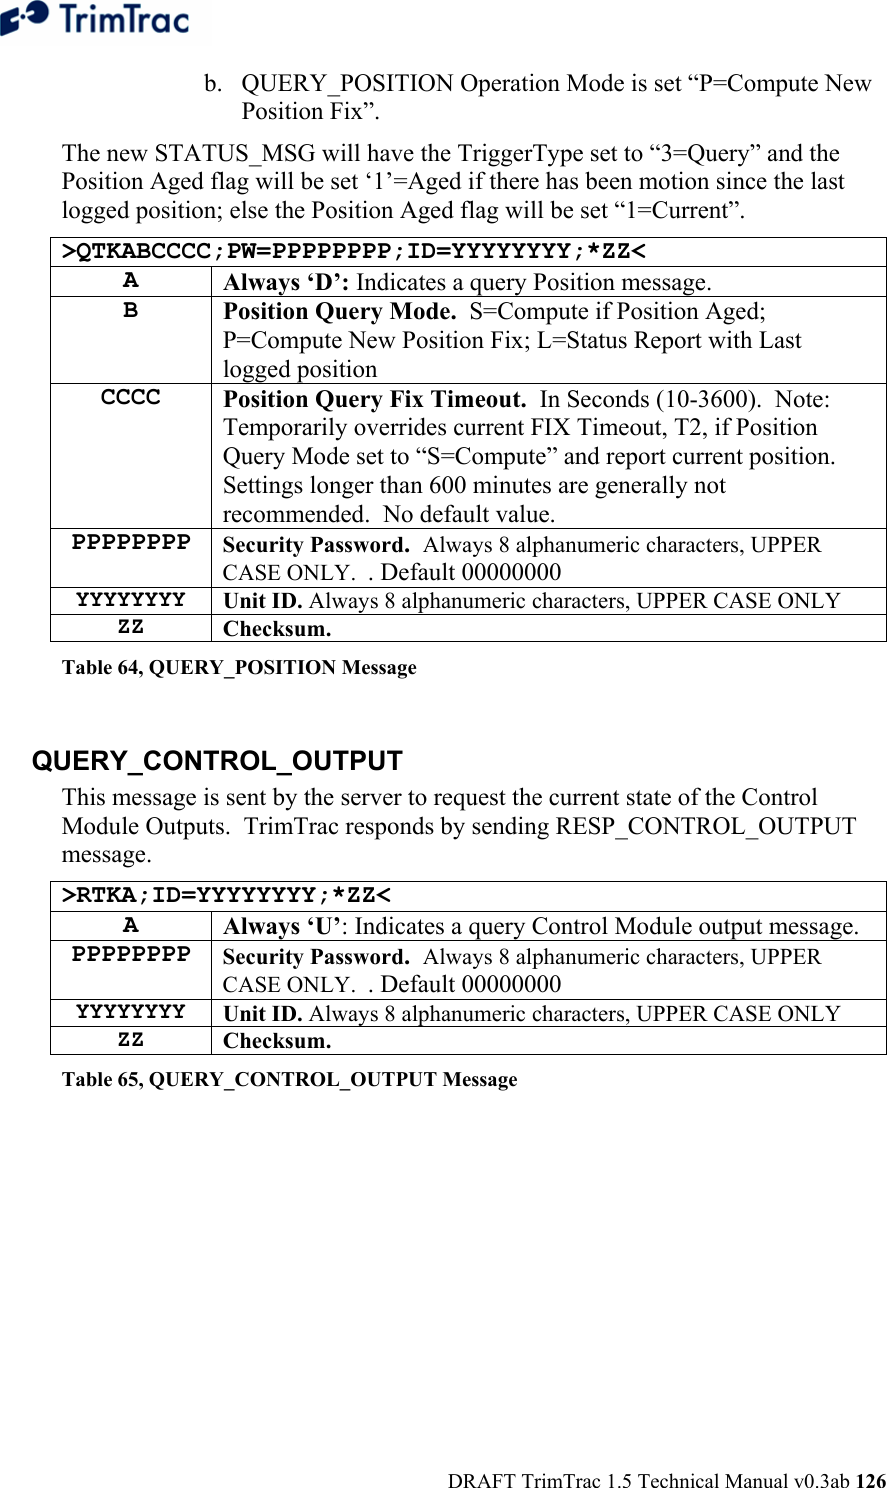  DRAFT TrimTrac 1.5 Technical Manual v0.3ab 126 b. QUERY_POSITION Operation Mode is set “P=Compute New Position Fix”. The new STATUS_MSG will have the TriggerType set to “3=Query” and the Position Aged flag will be set ‘1’=Aged if there has been motion since the last logged position; else the Position Aged flag will be set “1=Current”. &gt;QTKABCCCC;PW=PPPPPPPP;ID=YYYYYYYY;*ZZ&lt; A Always ‘D’: Indicates a query Position message. B Position Query Mode.  S=Compute if Position Aged; P=Compute New Position Fix; L=Status Report with Last logged position CCCC Position Query Fix Timeout.  In Seconds (10-3600).  Note:  Temporarily overrides current FIX Timeout, T2, if Position Query Mode set to “S=Compute” and report current position.  Settings longer than 600 minutes are generally not recommended.  No default value.   PPPPPPPP Security Password.  Always 8 alphanumeric characters, UPPER CASE ONLY.  . Default 00000000 YYYYYYYY  Unit ID. Always 8 alphanumeric characters, UPPER CASE ONLY ZZ  Checksum.   Table 64, QUERY_POSITION Message  QUERY_CONTROL_OUTPUT This message is sent by the server to request the current state of the Control Module Outputs.  TrimTrac responds by sending RESP_CONTROL_OUTPUT message. &gt;RTKA;ID=YYYYYYYY;*ZZ&lt; A  Always ‘U’: Indicates a query Control Module output message. PPPPPPPP Security Password.  Always 8 alphanumeric characters, UPPER CASE ONLY.  . Default 00000000 YYYYYYYY  Unit ID. Always 8 alphanumeric characters, UPPER CASE ONLY ZZ  Checksum.   Table 65, QUERY_CONTROL_OUTPUT Message  